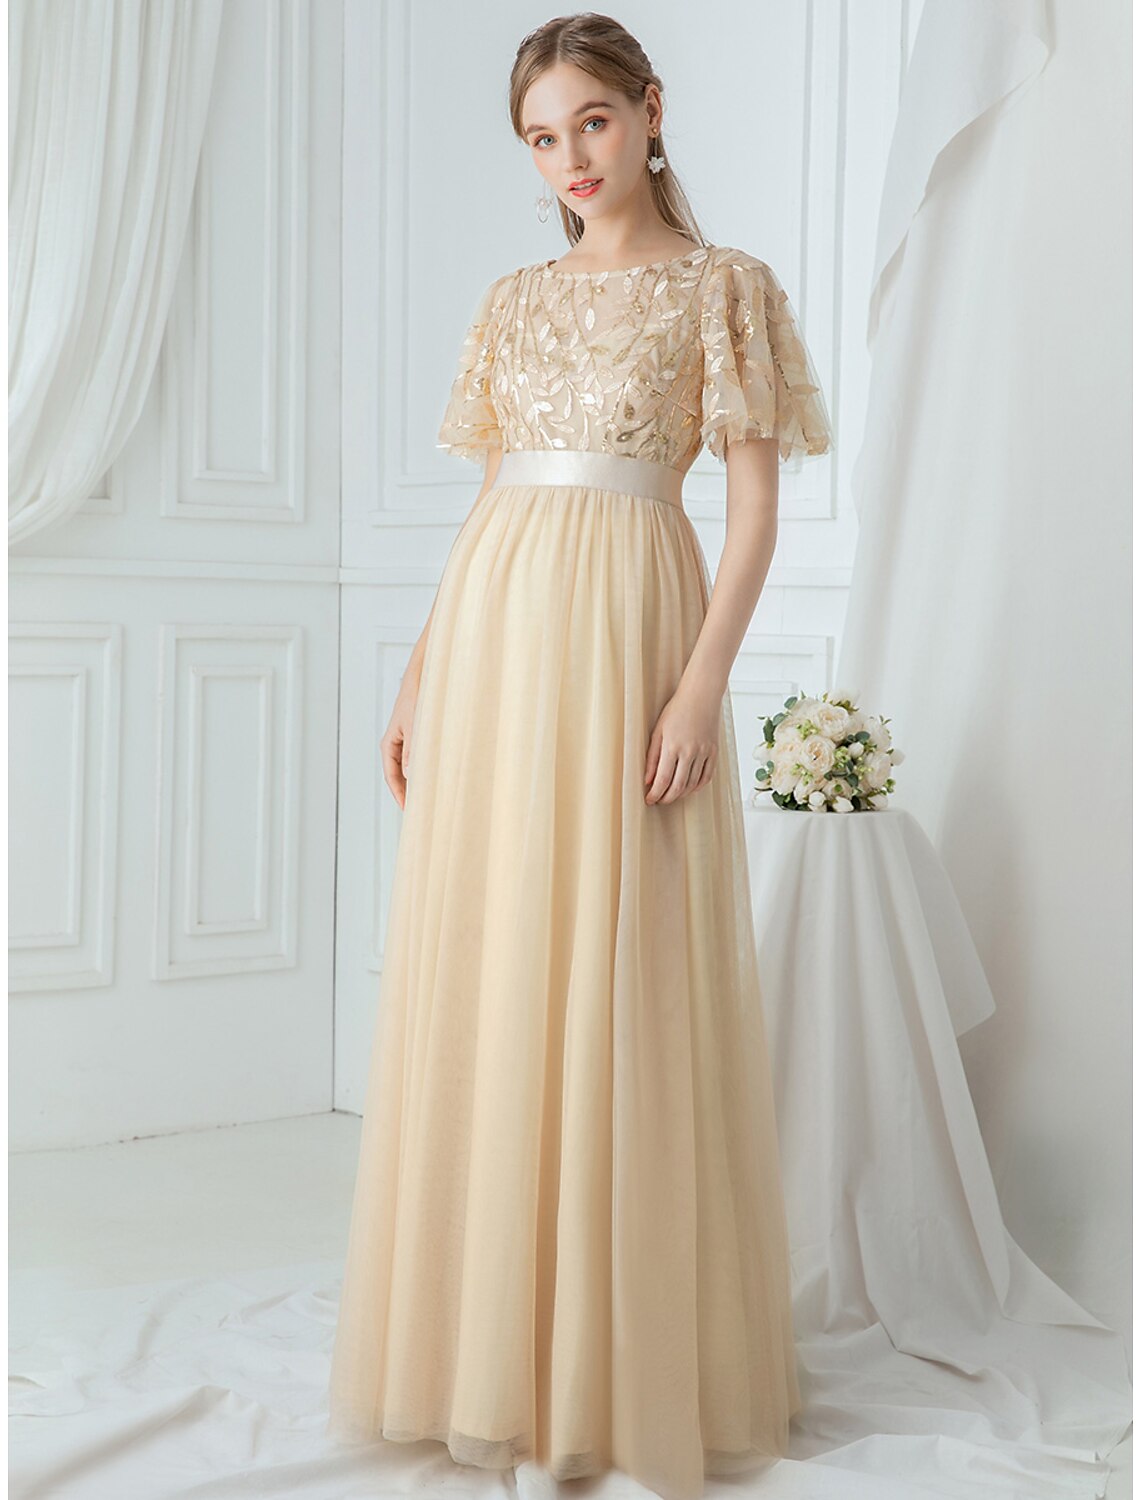 A-Line Prom Dresses Empire Dress Wedding Guest Prom Floor Length Short Sleeve Jewel Neck Bridesmaid Dress Tulle with Sequin Appliques